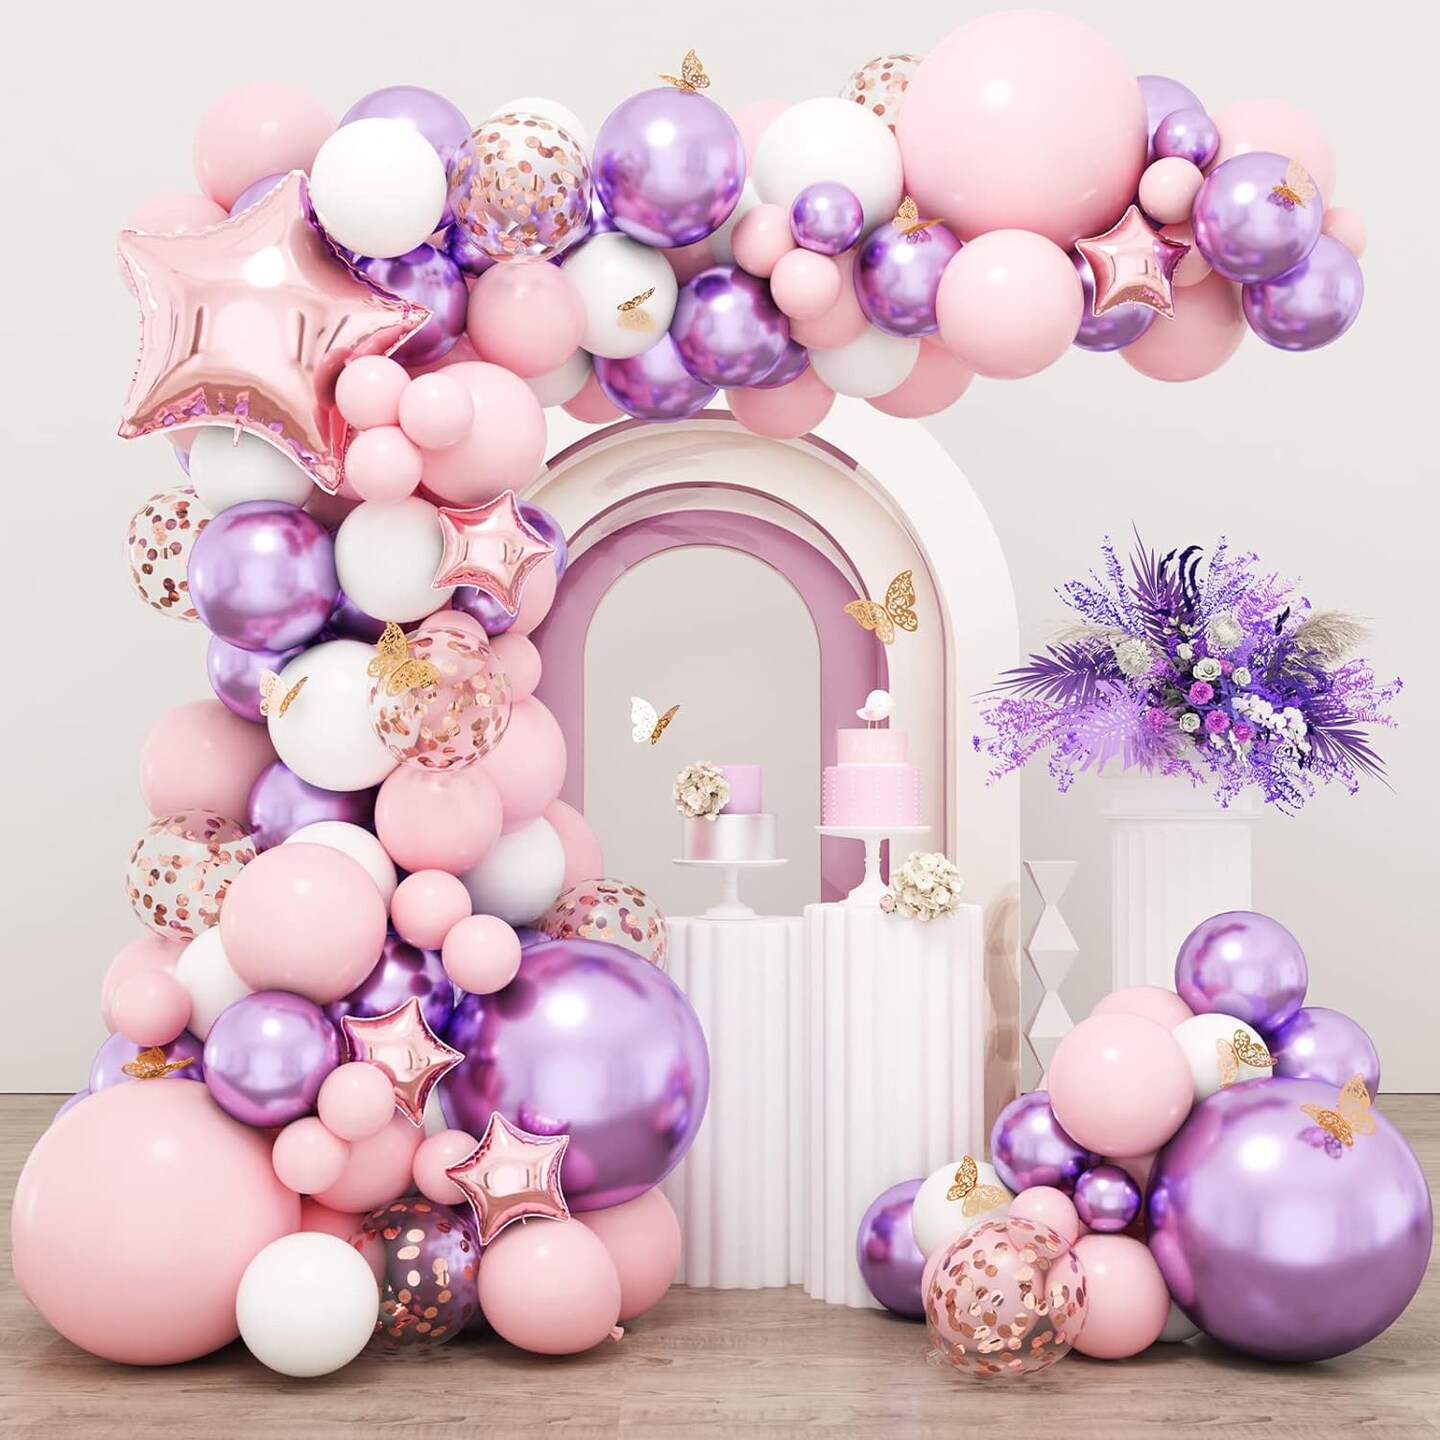 176pcs Pink Purple Balloon Garland, Baby Shower Decorations for Girl with Butterfly Decorations Foil Balloons for Birthday Party Bridal Shower Bachelorette Engagement Decoration